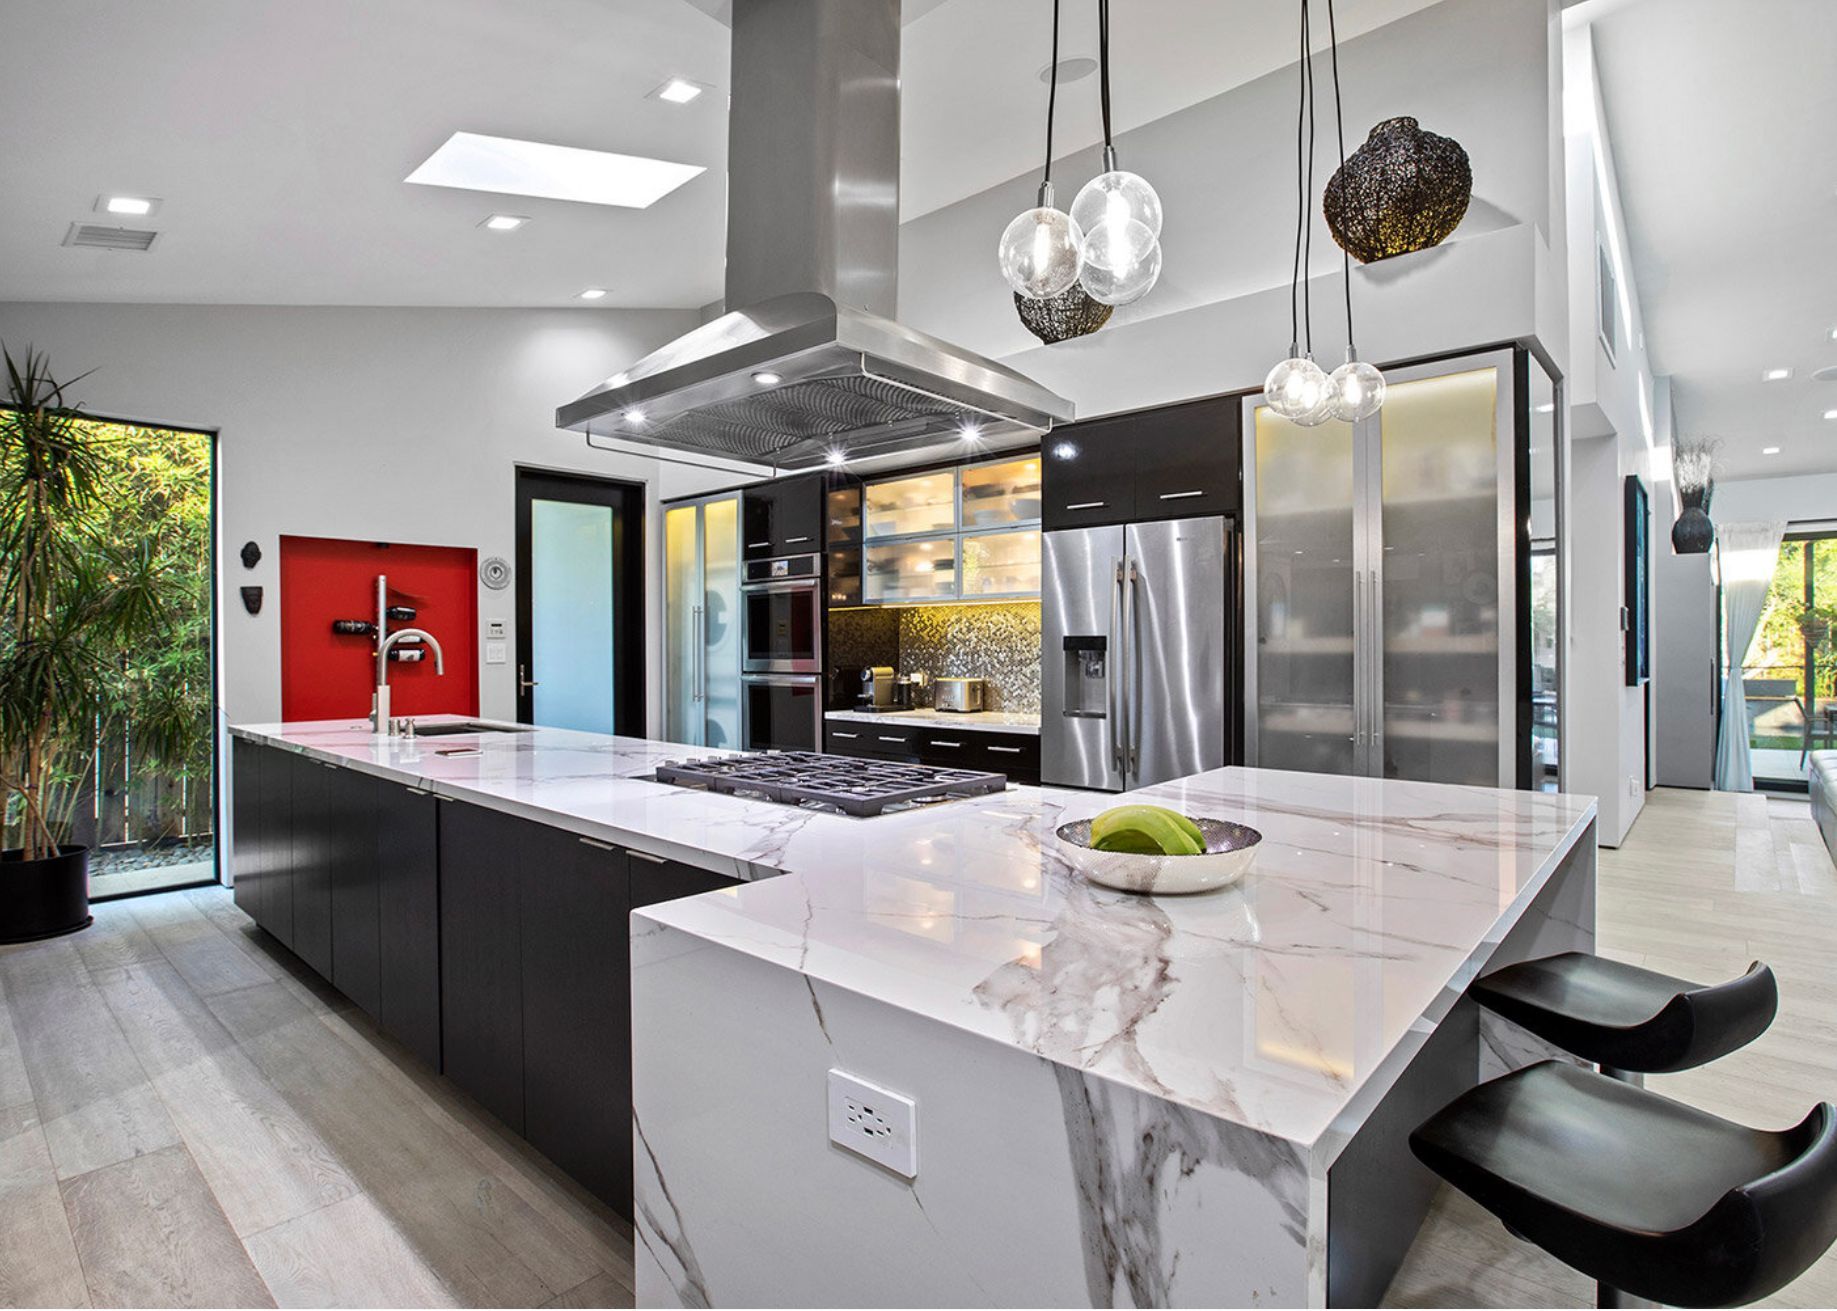 Kitchen remodel services based in Northern California